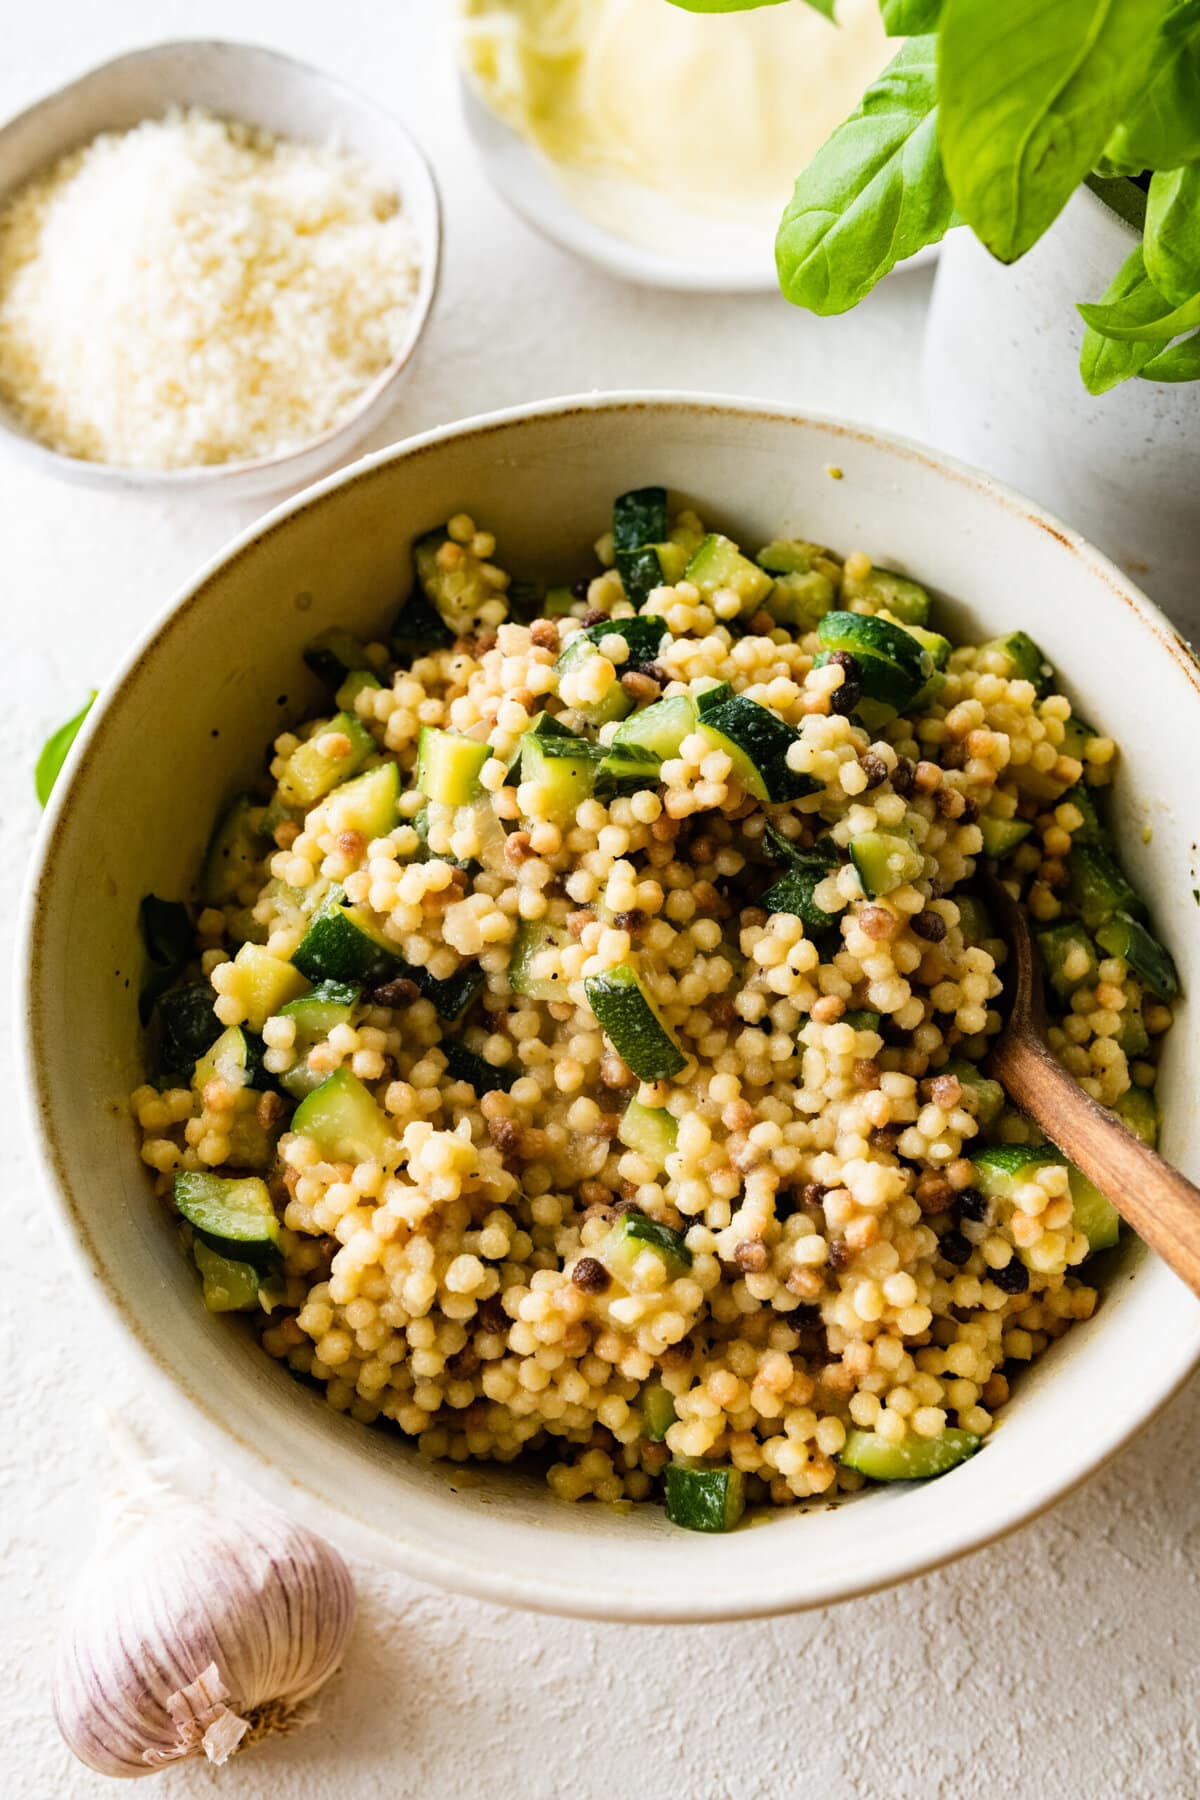 Step by step instructions Fregola Sarda Pasta Recipe with Zucchini and Cheese- mixing zucchini and onions with fregola.